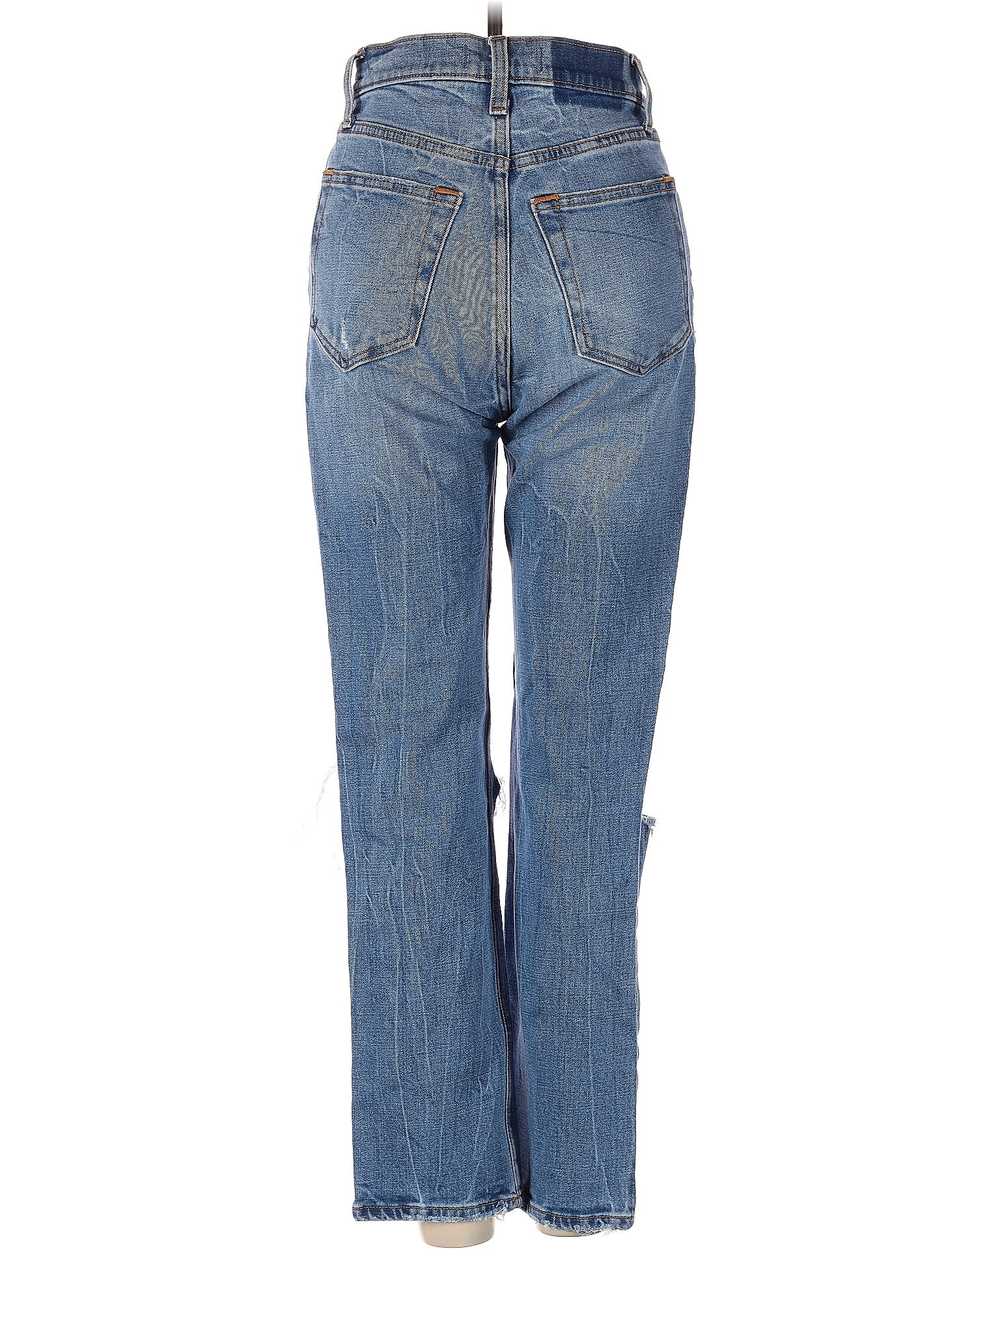 Abercrombie & Fitch Women Blue Jeans 00 - image 2